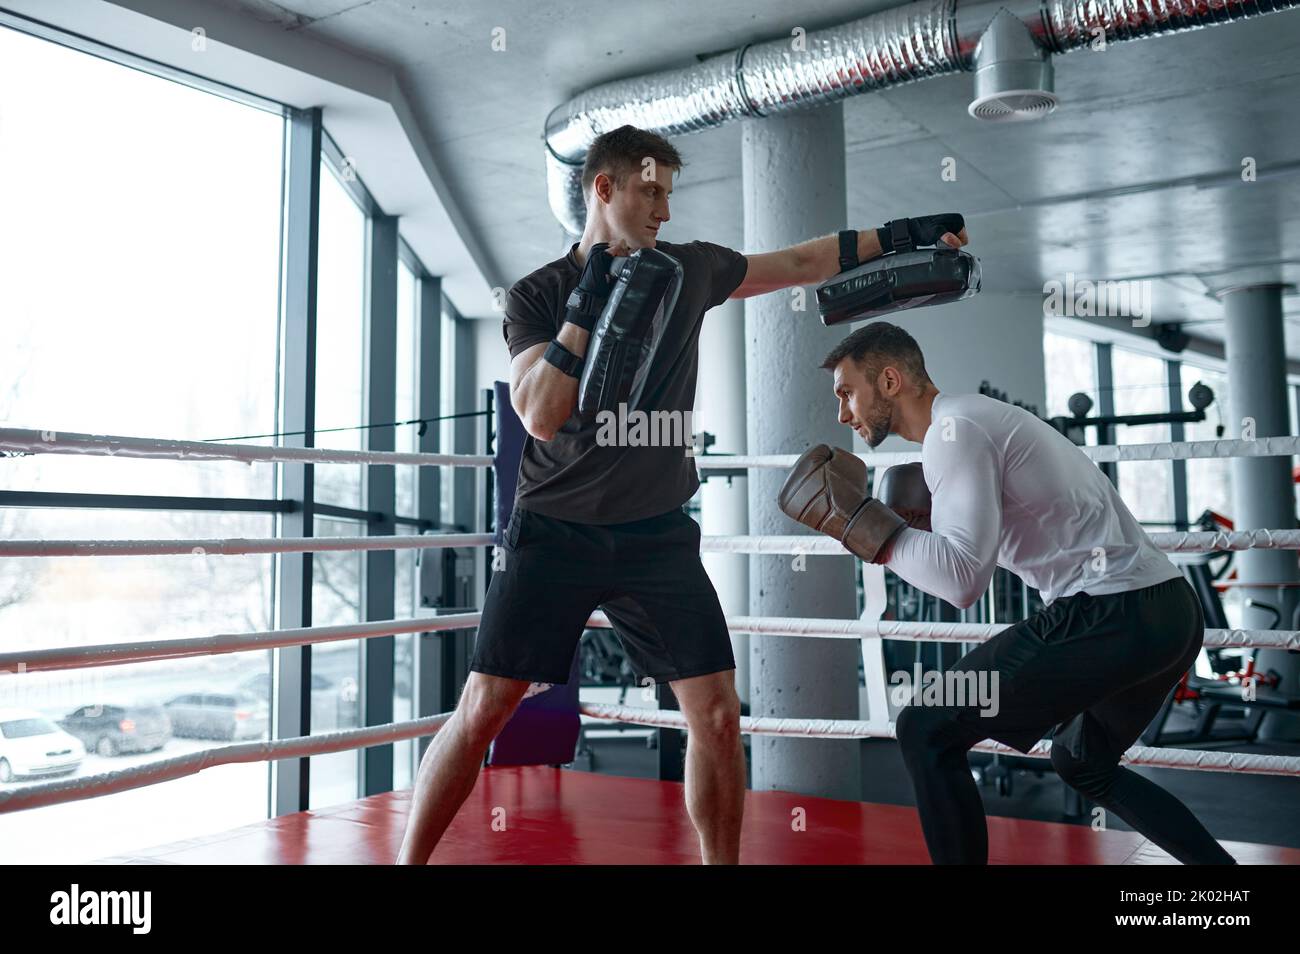 Boxer practicing with personal trainer Stock Photo